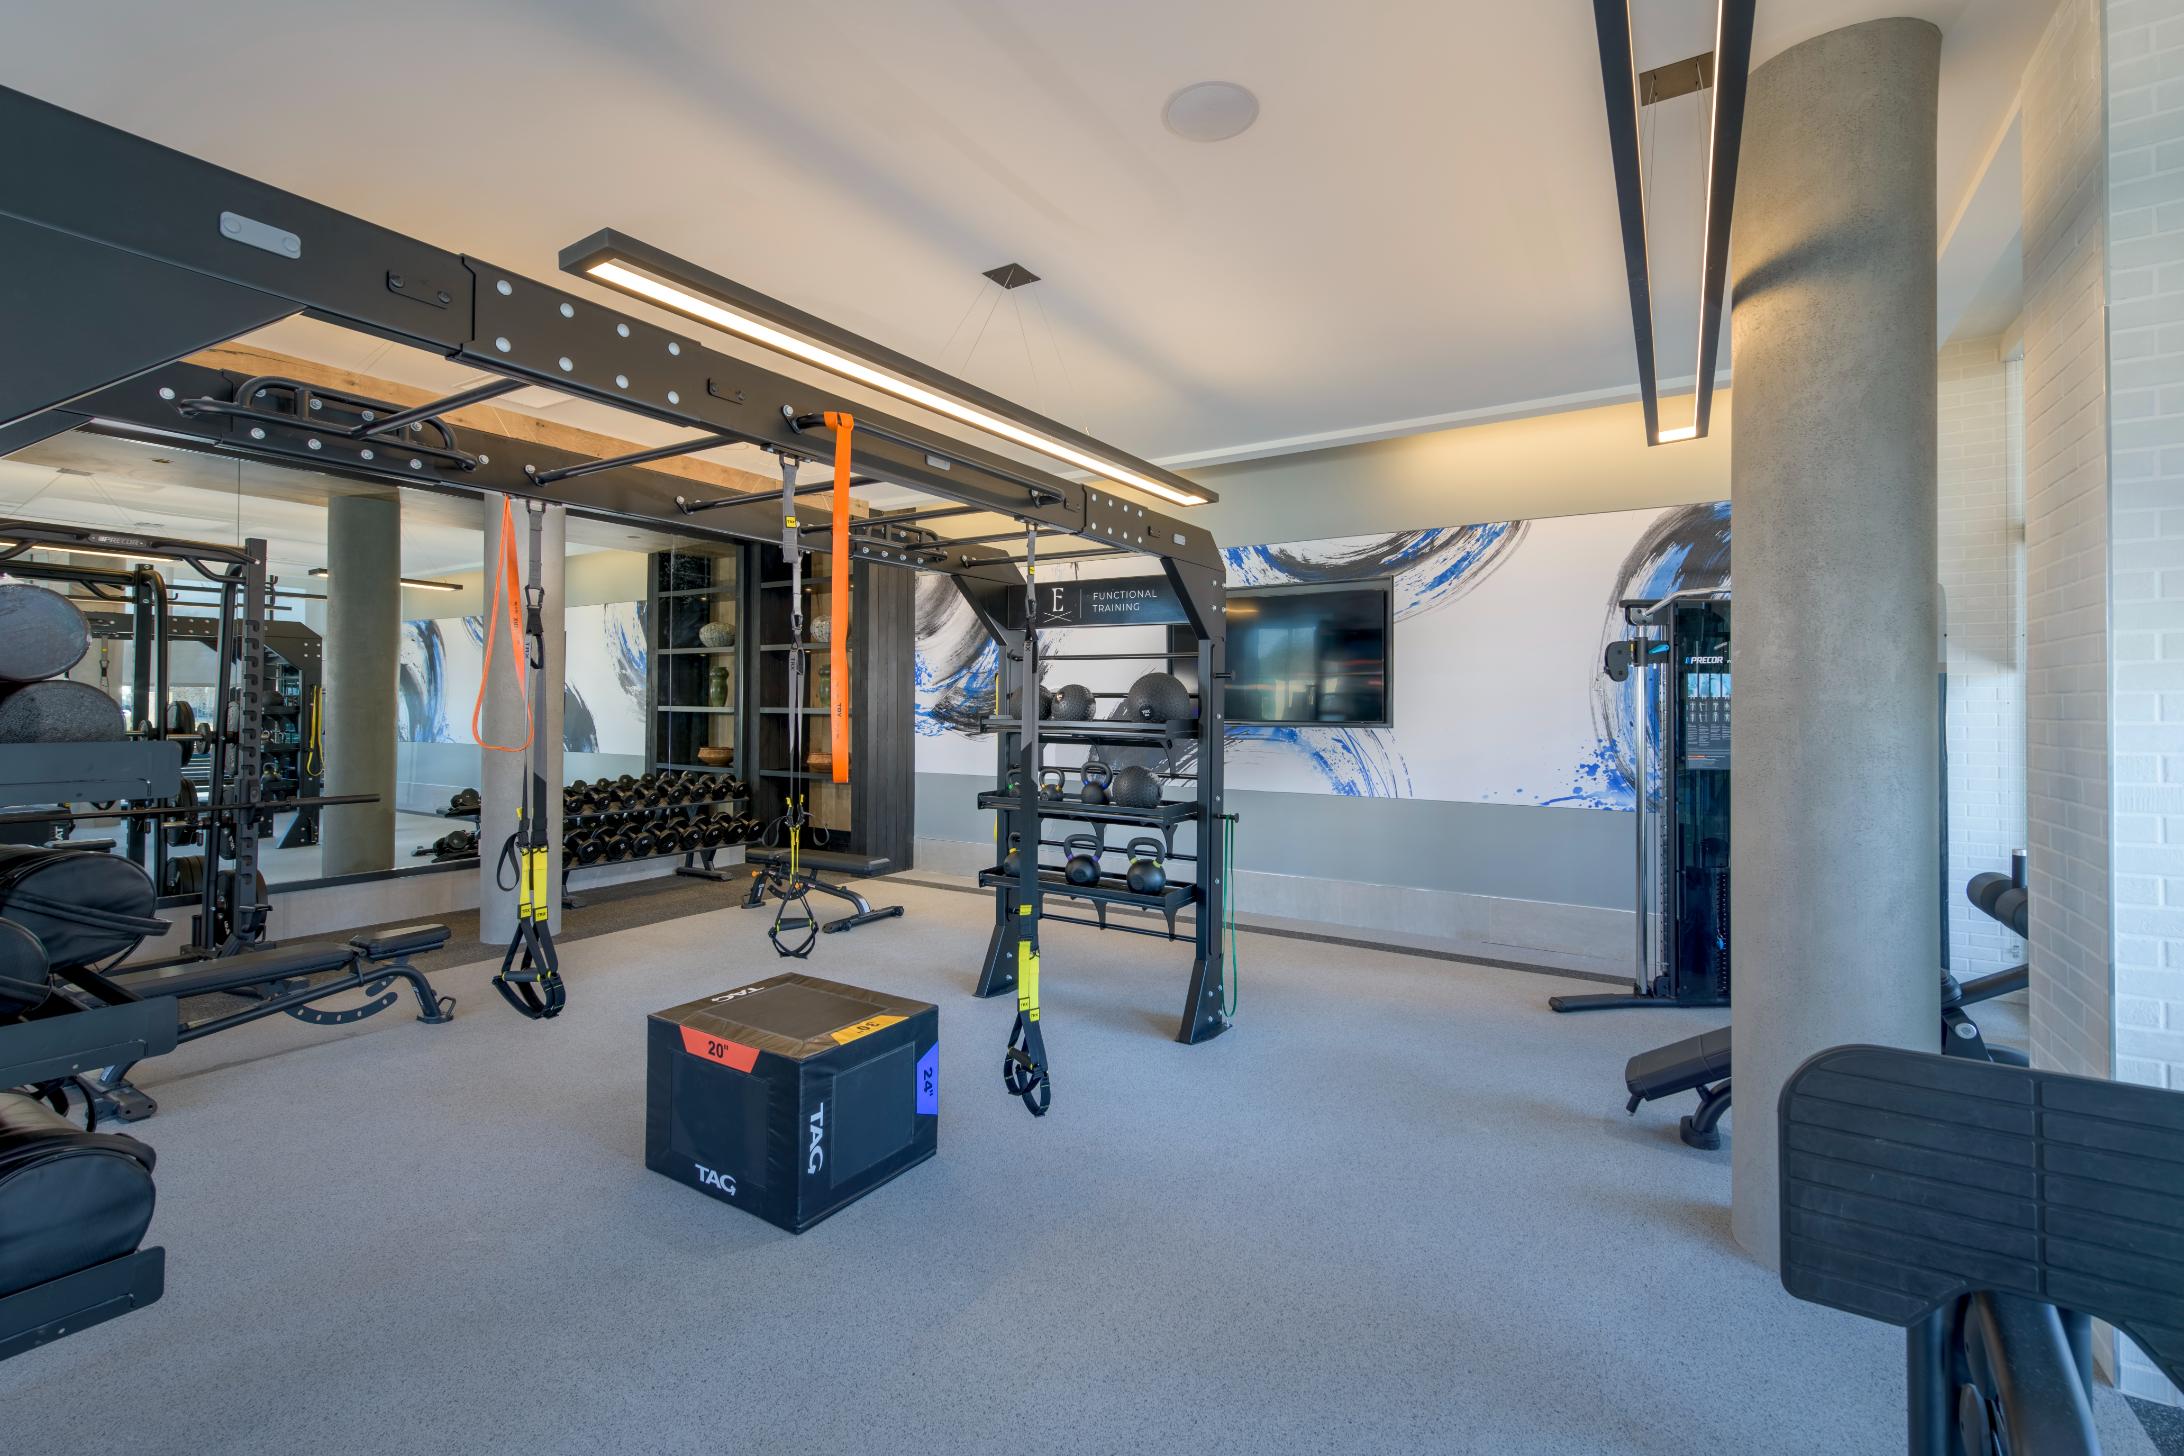 Workout with our state-of-the-art equipment at whatever time is best for you